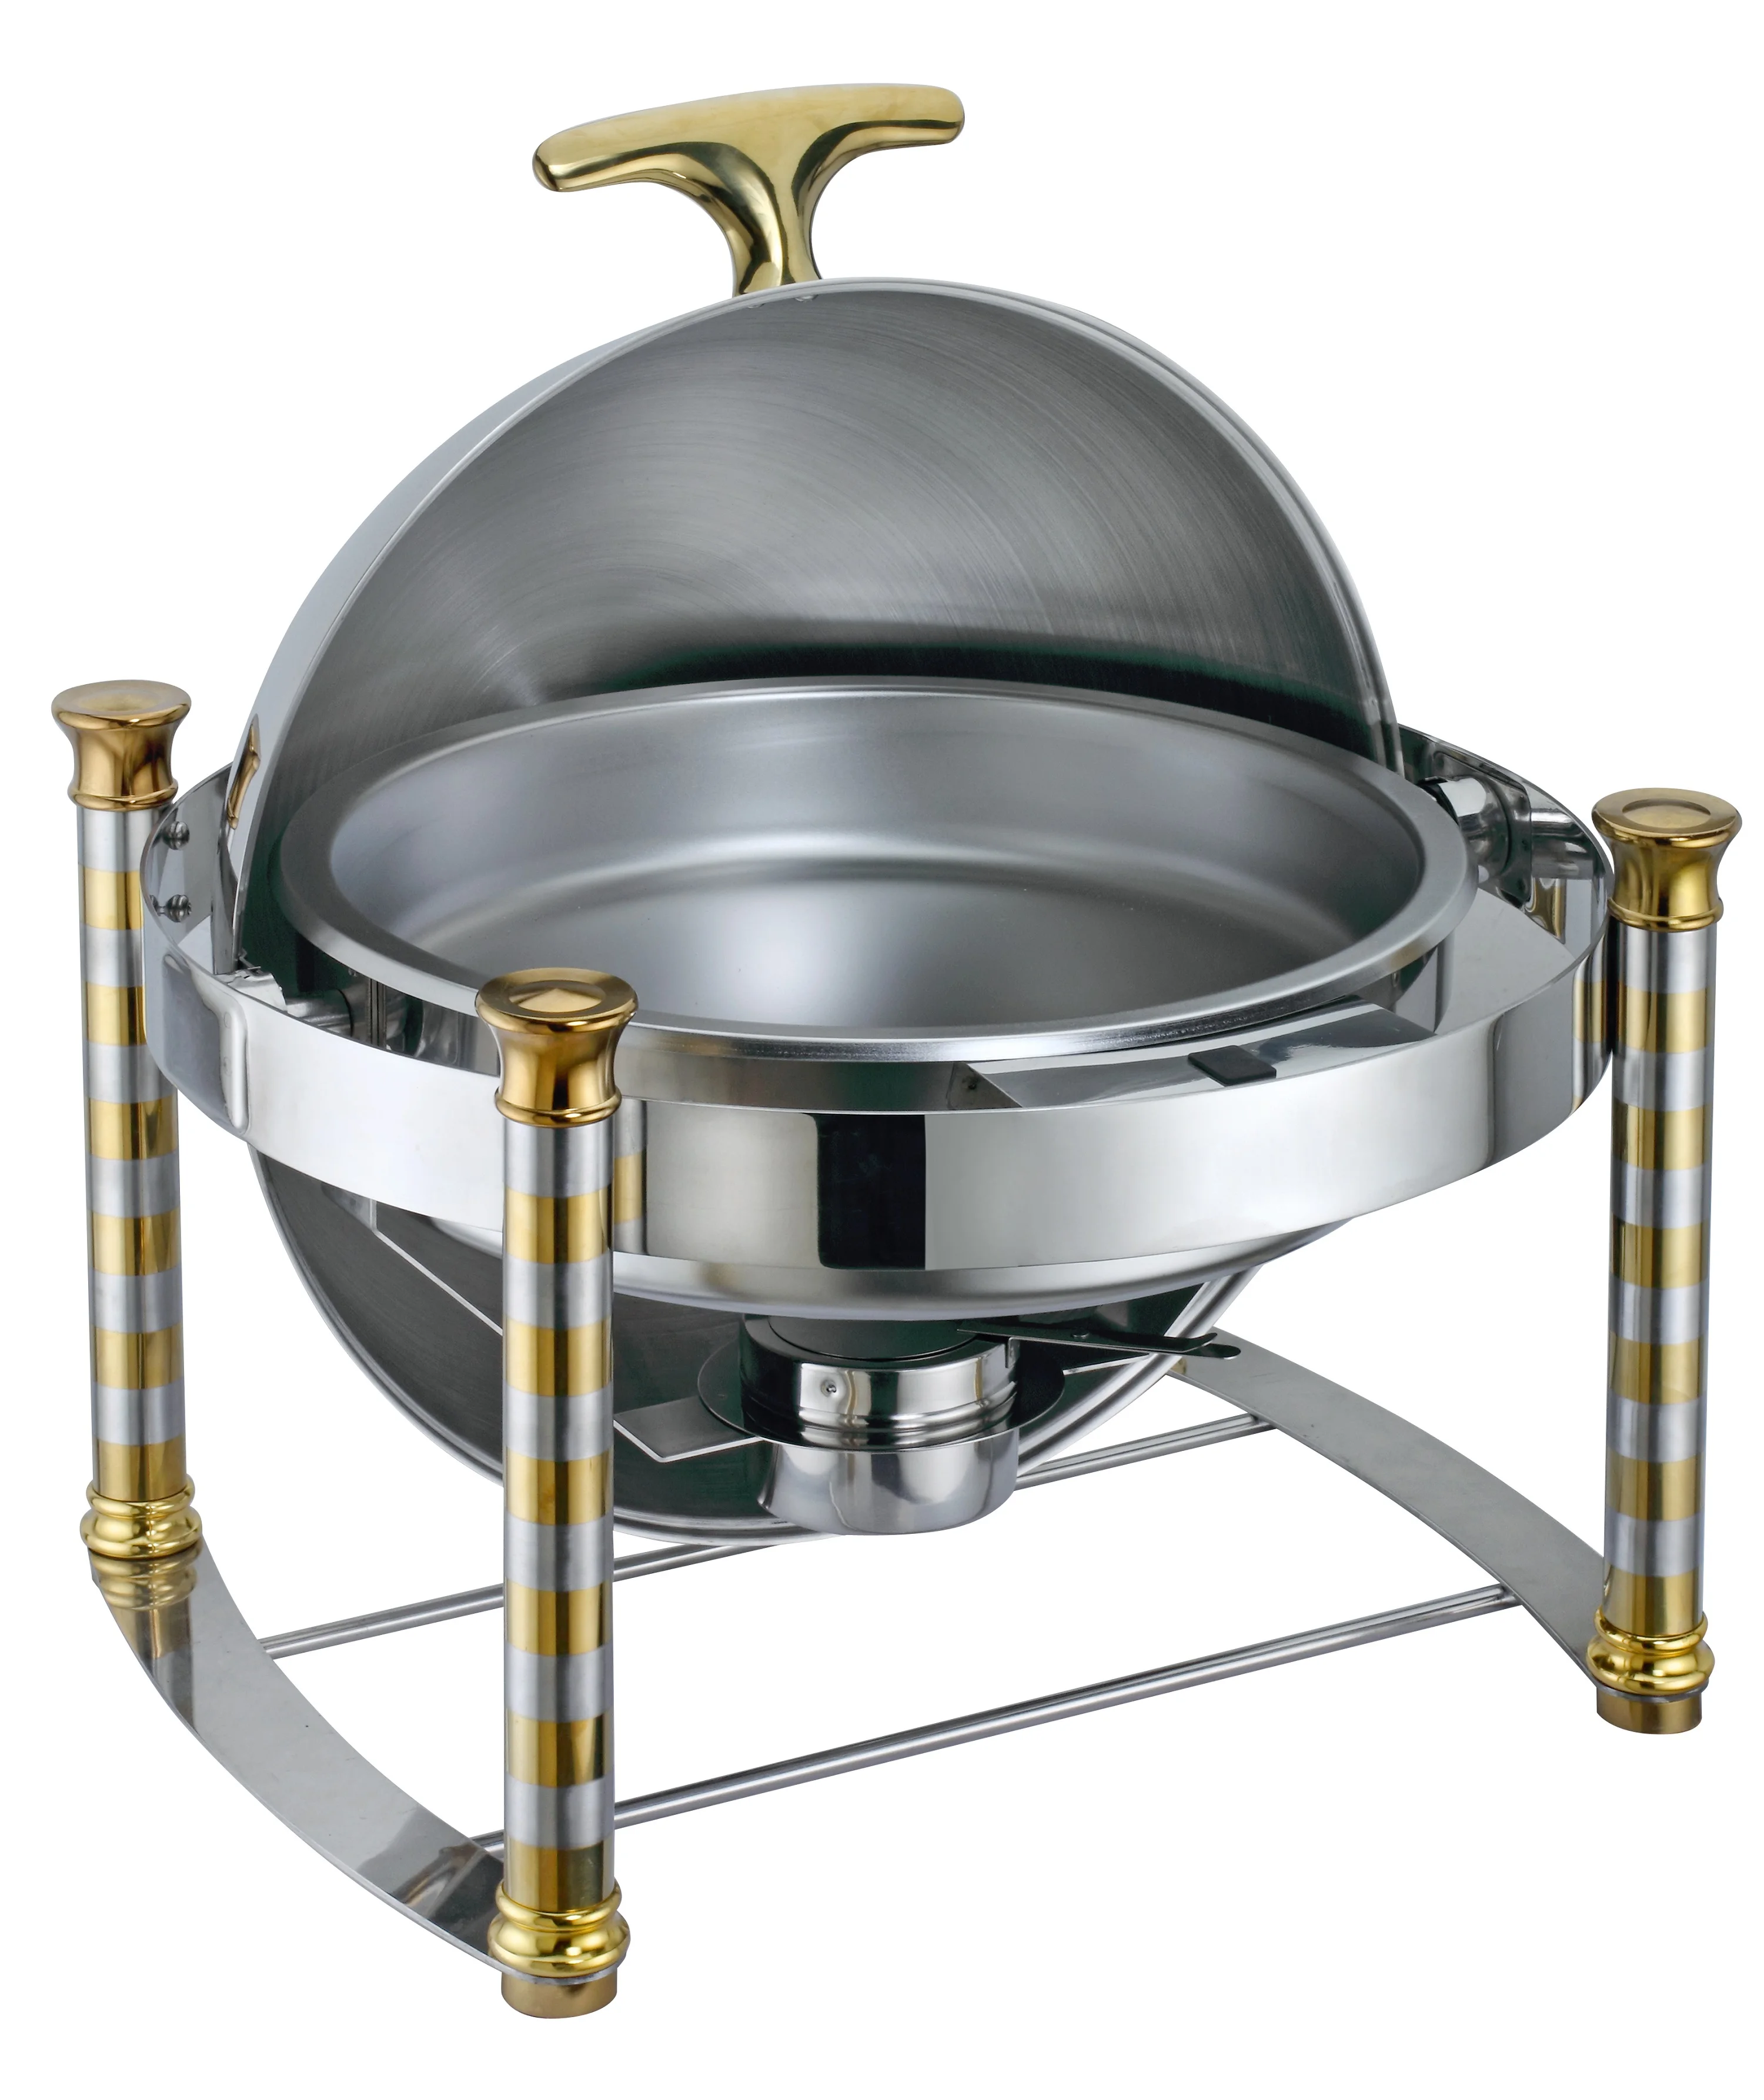 Buffet Catering Equipment Chafing Dishes For Sale Parties - Buy Chafing Dishes For Sale,Chafing ...